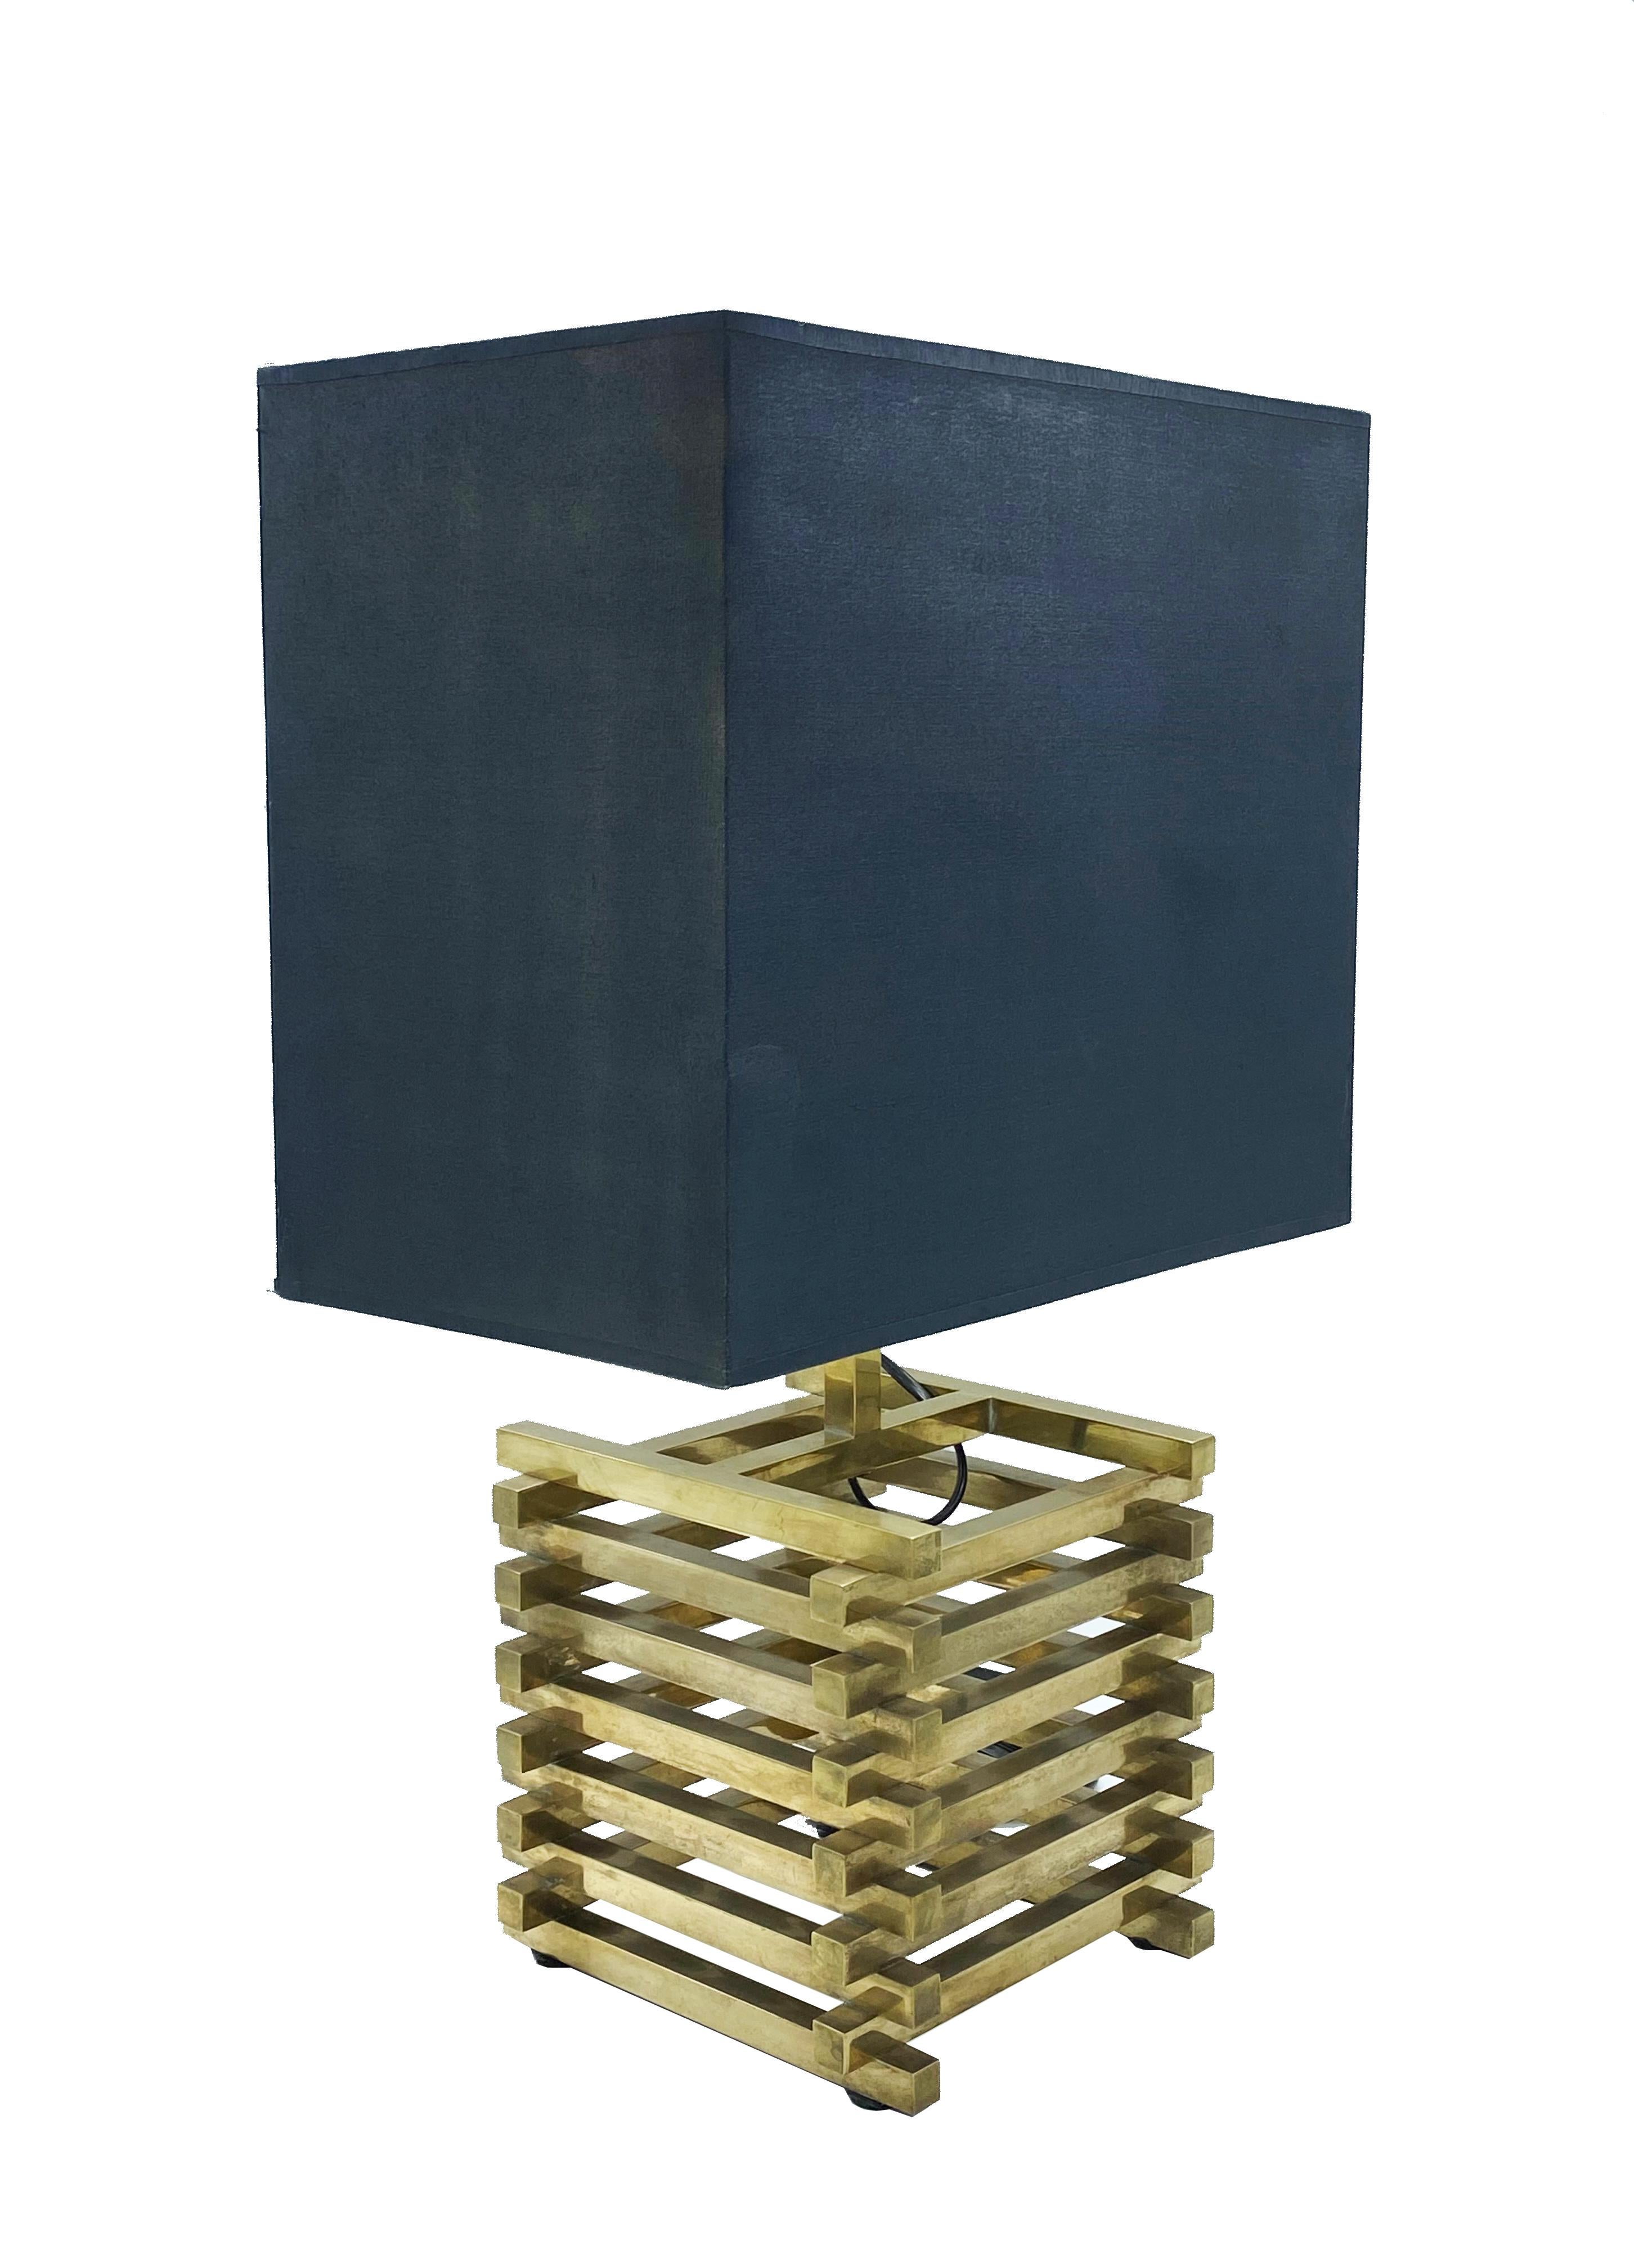 Elegant brass table lamp with black square lampshade, made by Romeo Rega.
Brass base cm.30 x 20 x 20.